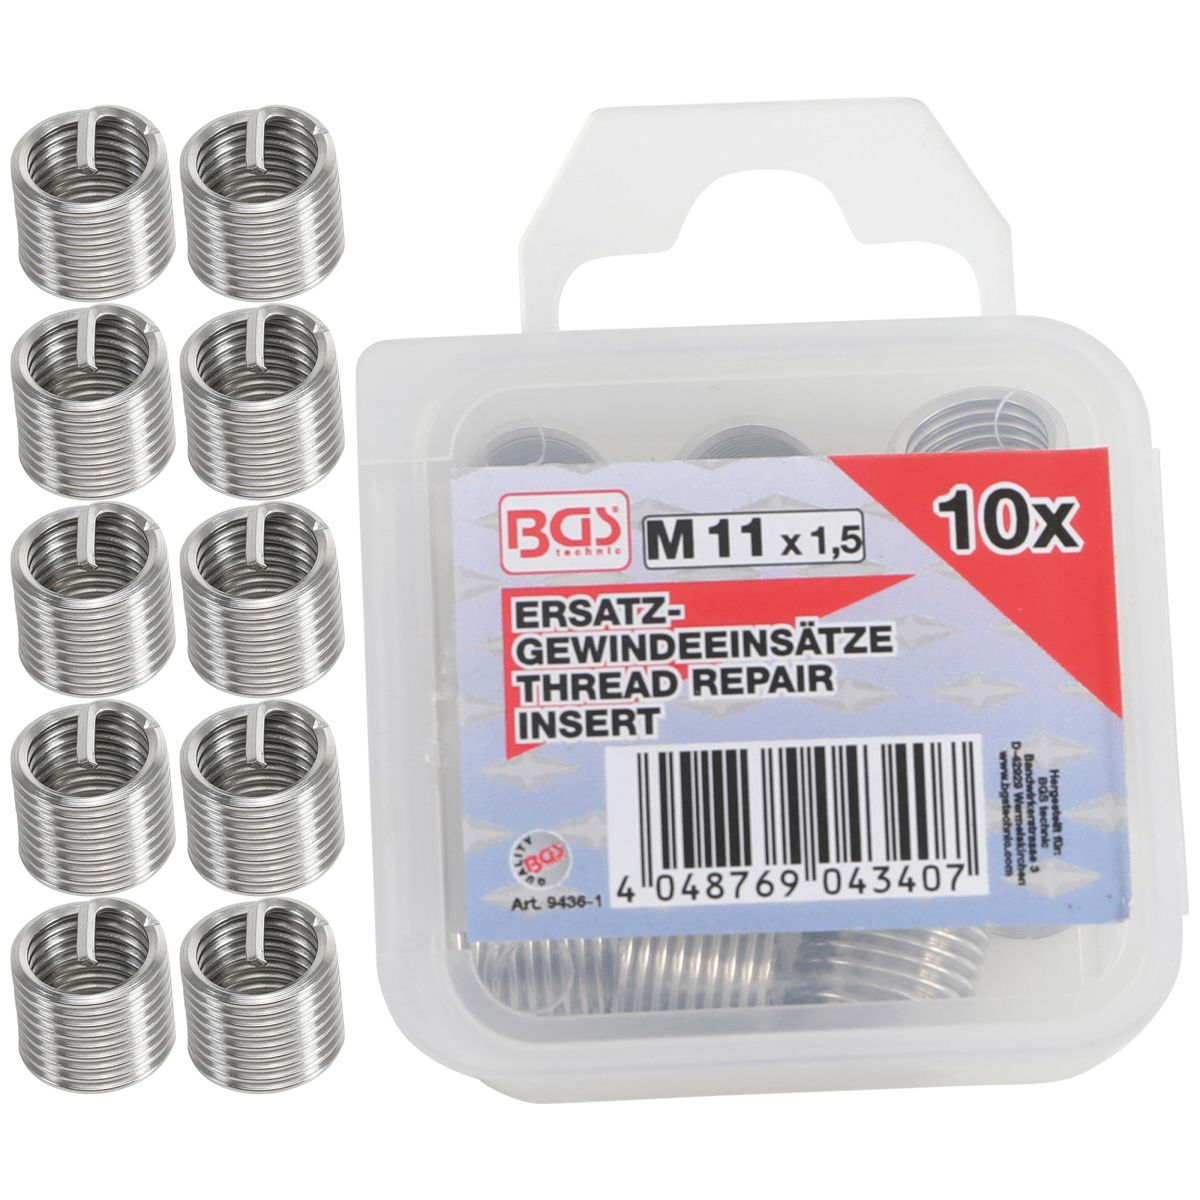 Replacement Thread Inserts | M11 x 1.5 mm | 10 pcs.